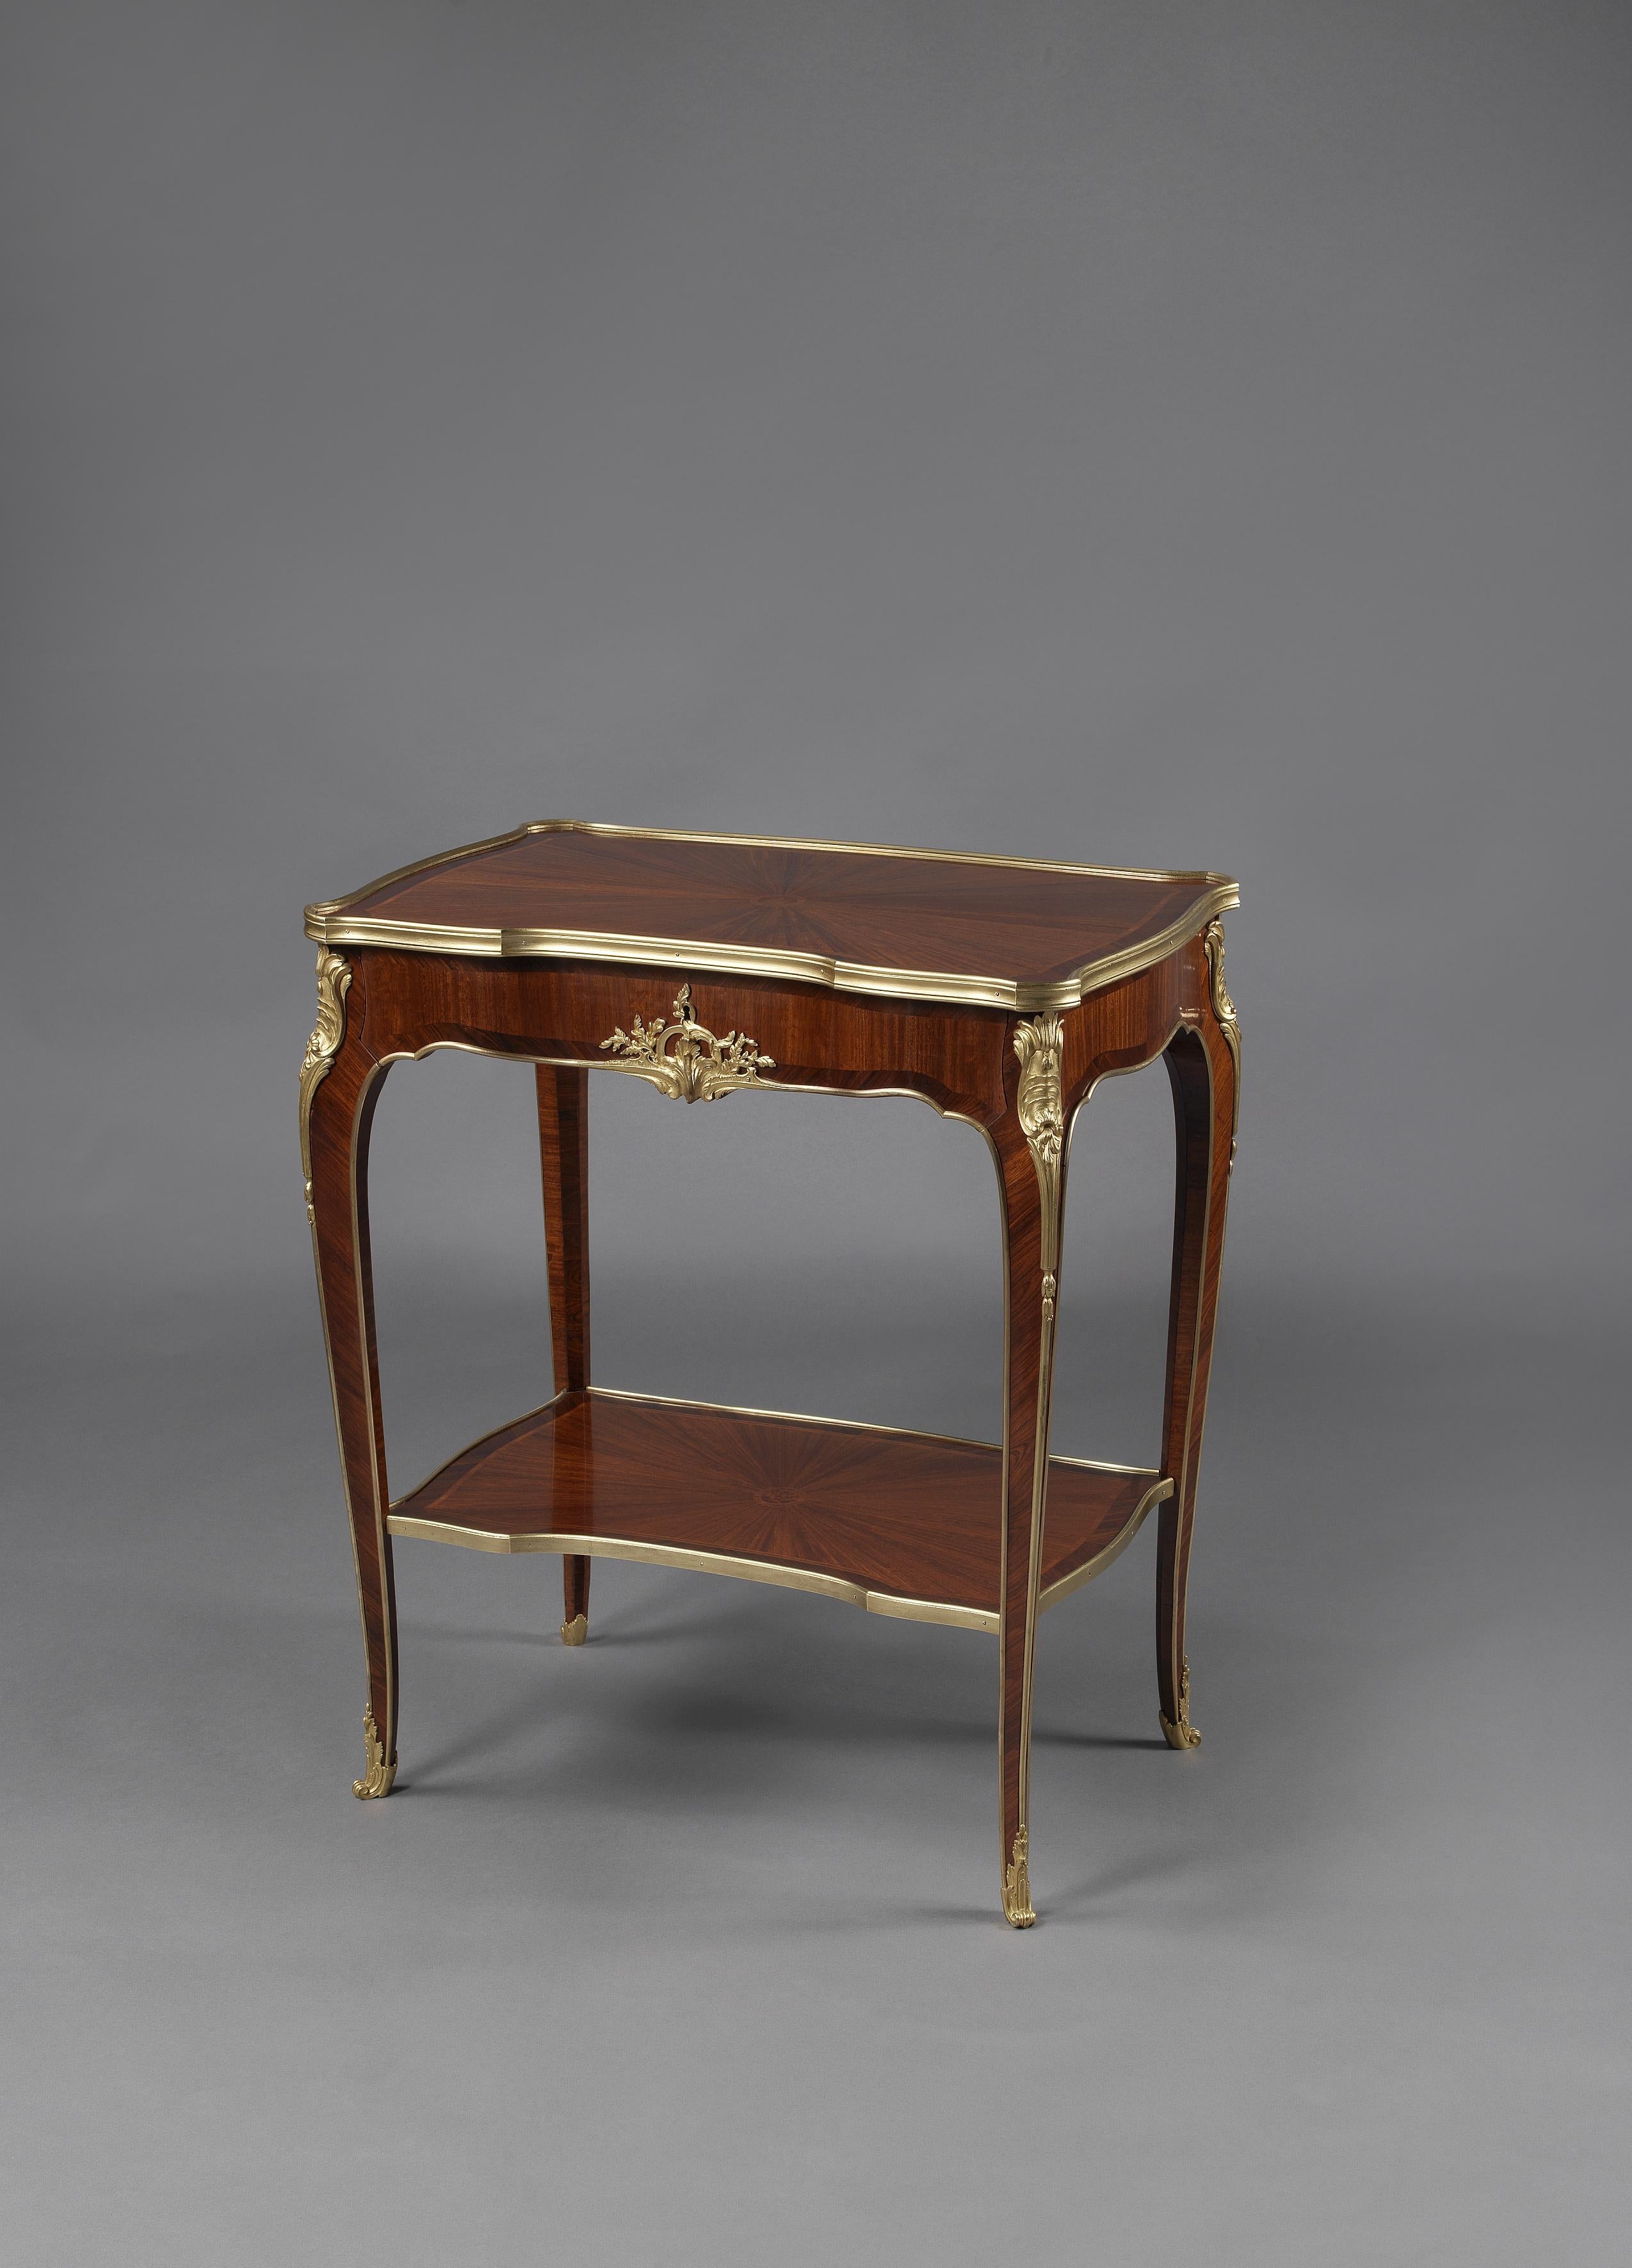 A Louis XV style gilt bronze-mounted marquetry salon table by Mercier Frères.

French, circa 1900. 

This fine petite salon table has a shaped gilt-bronze banded top inlaid with radiating parquetry above a frieze drawer centred by a foliate